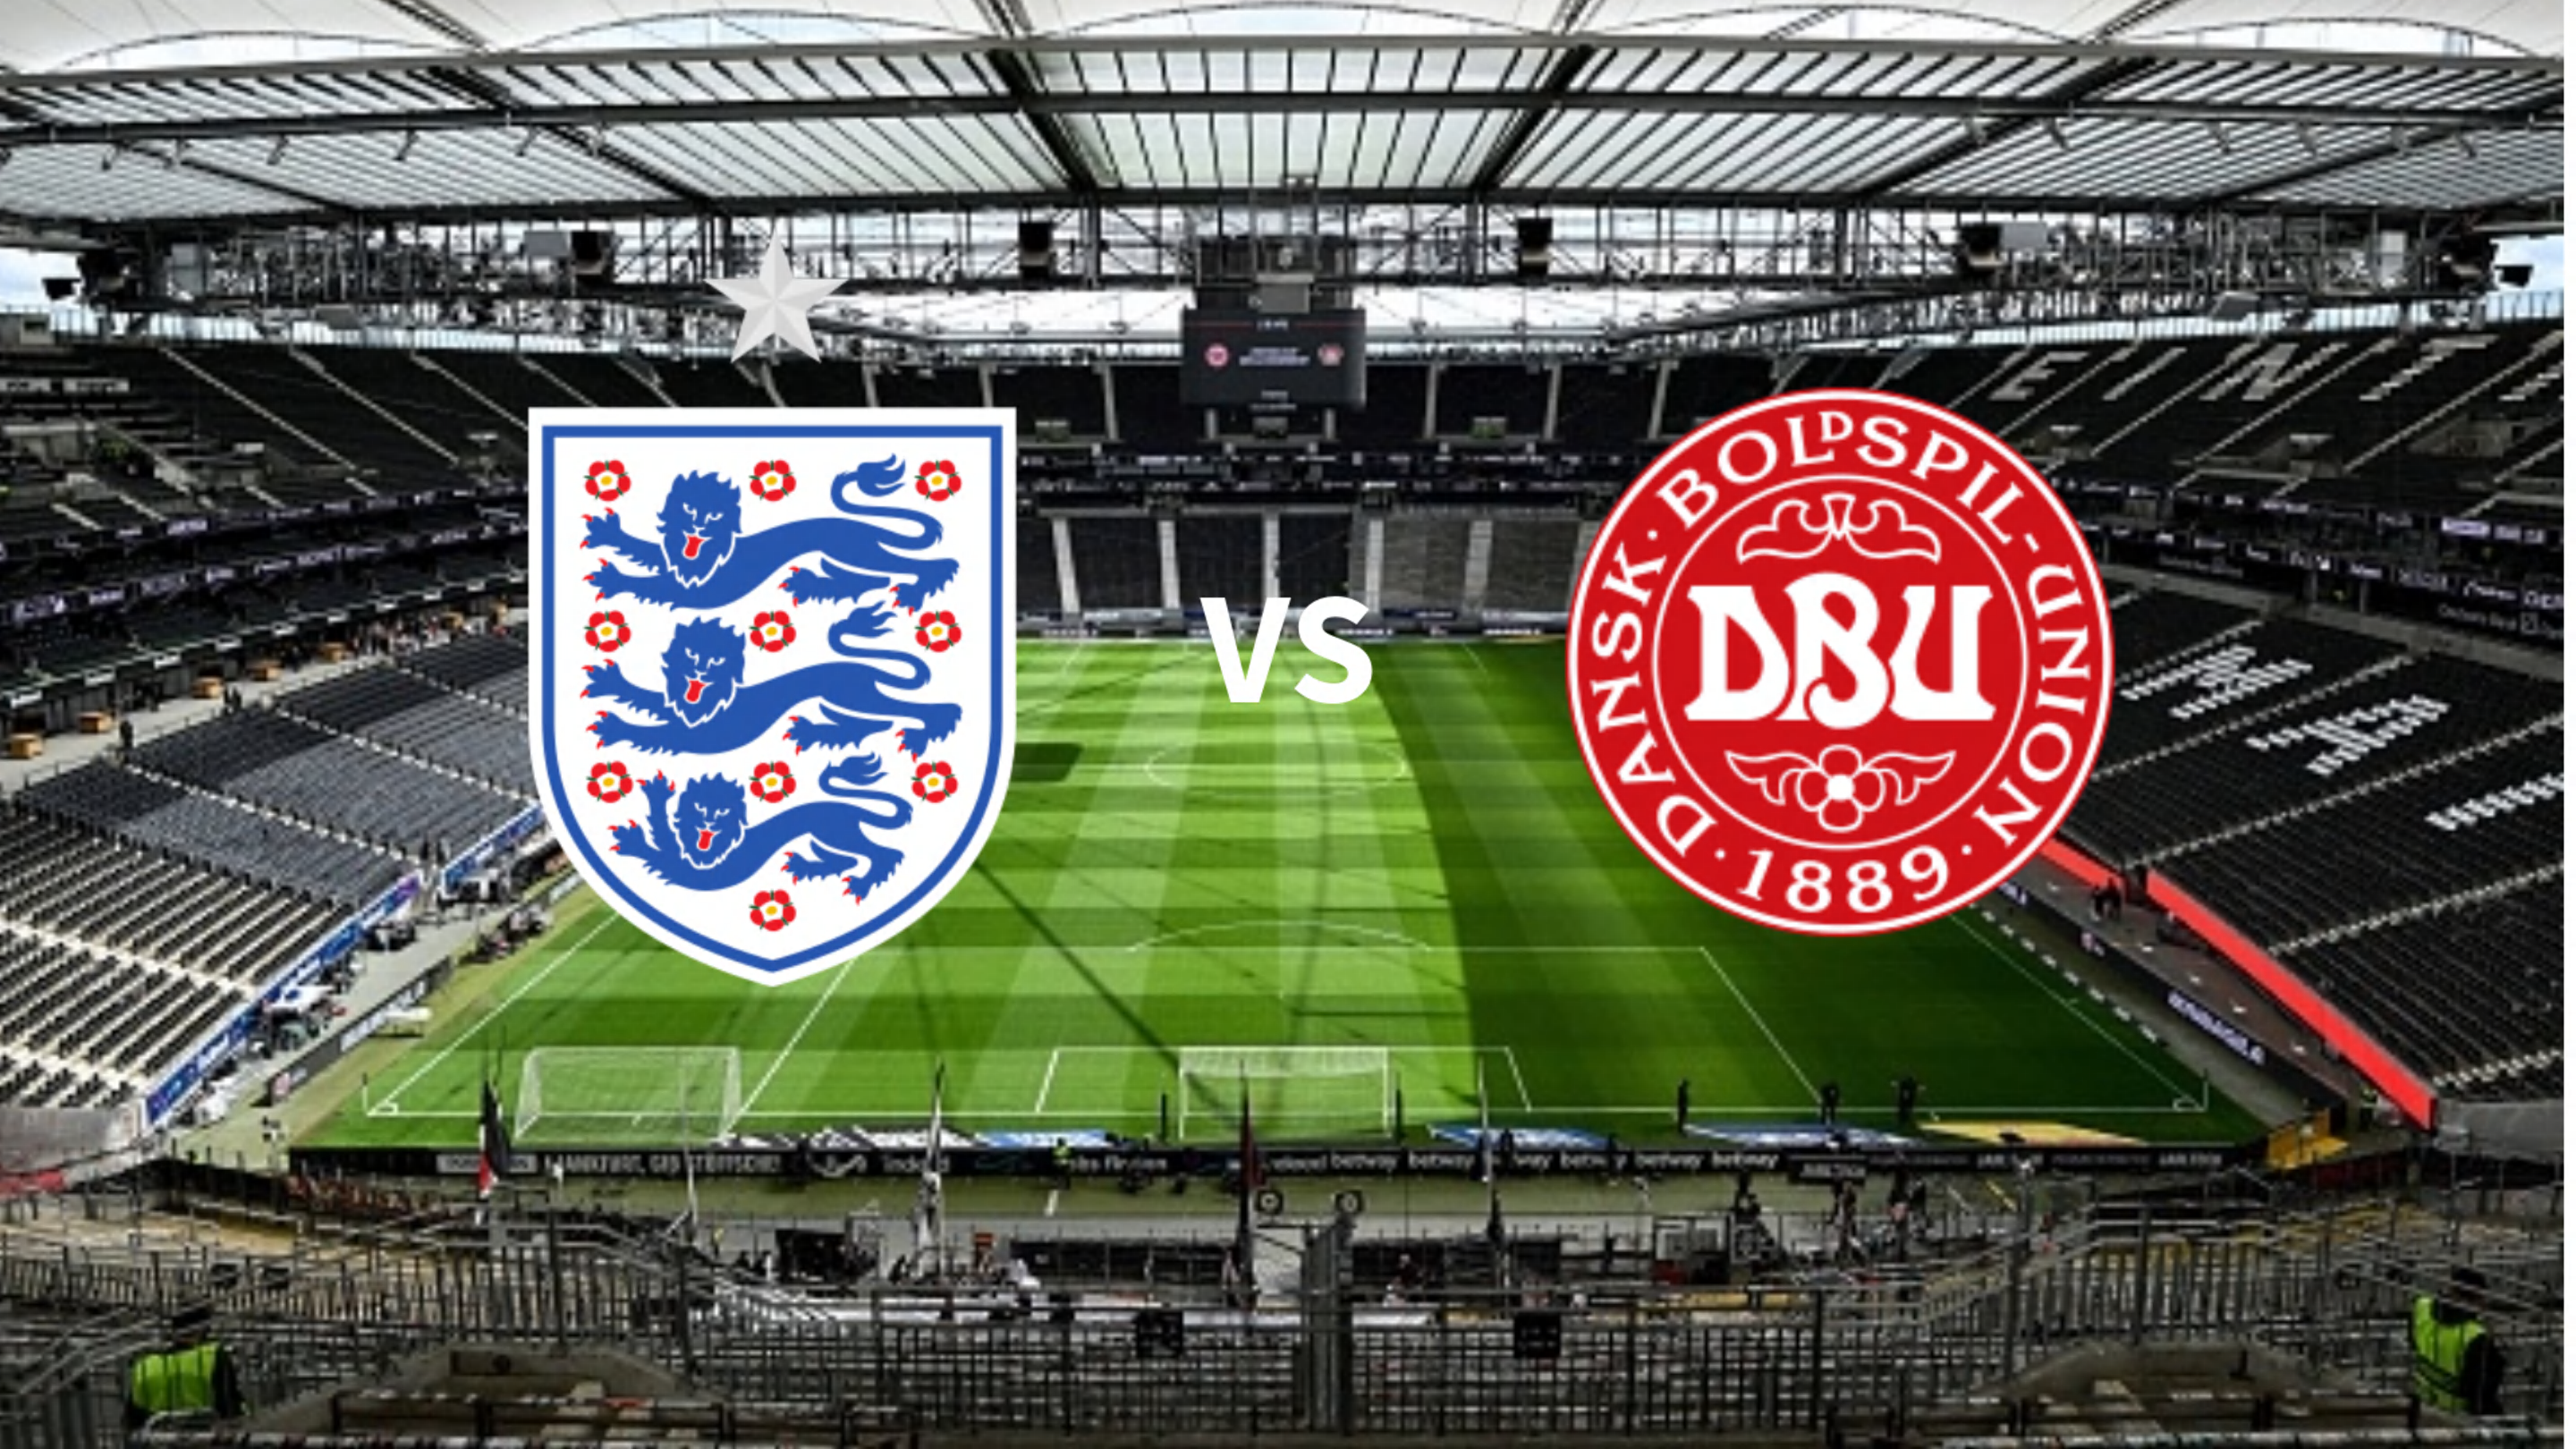 Denmark vs England: Preview, predictions and lineups 